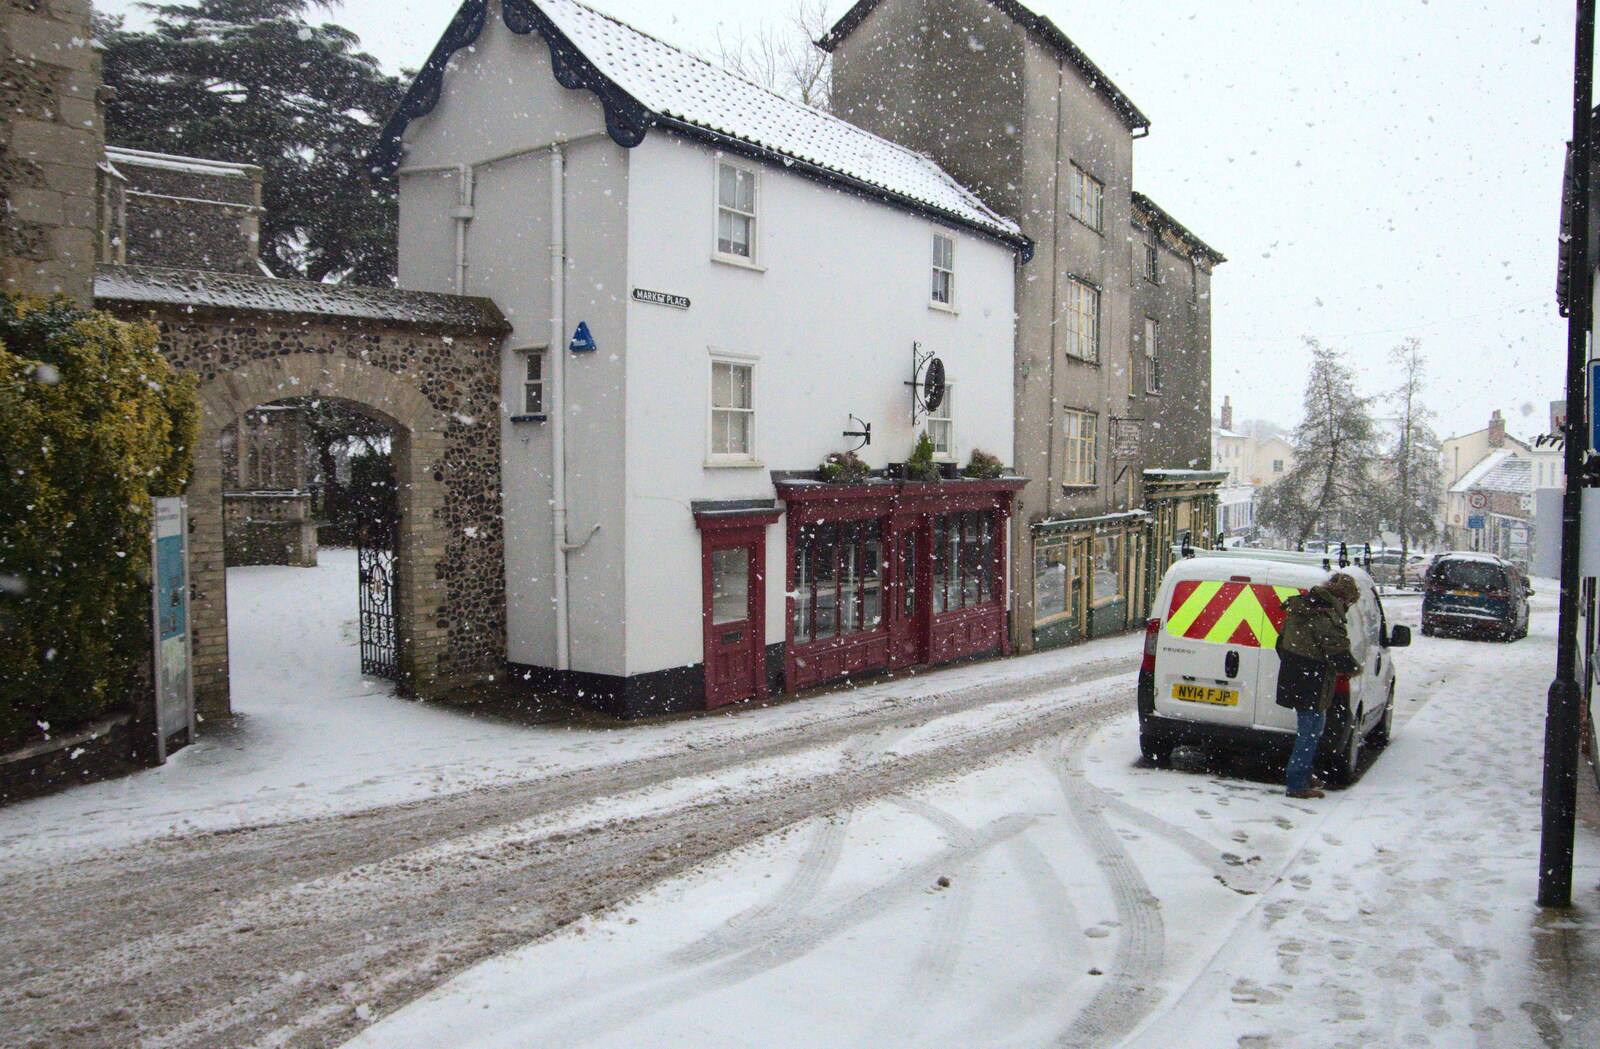 Market Place and the church entrance from A Snowy Morning, Diss, Norfolk - 16th January 2021